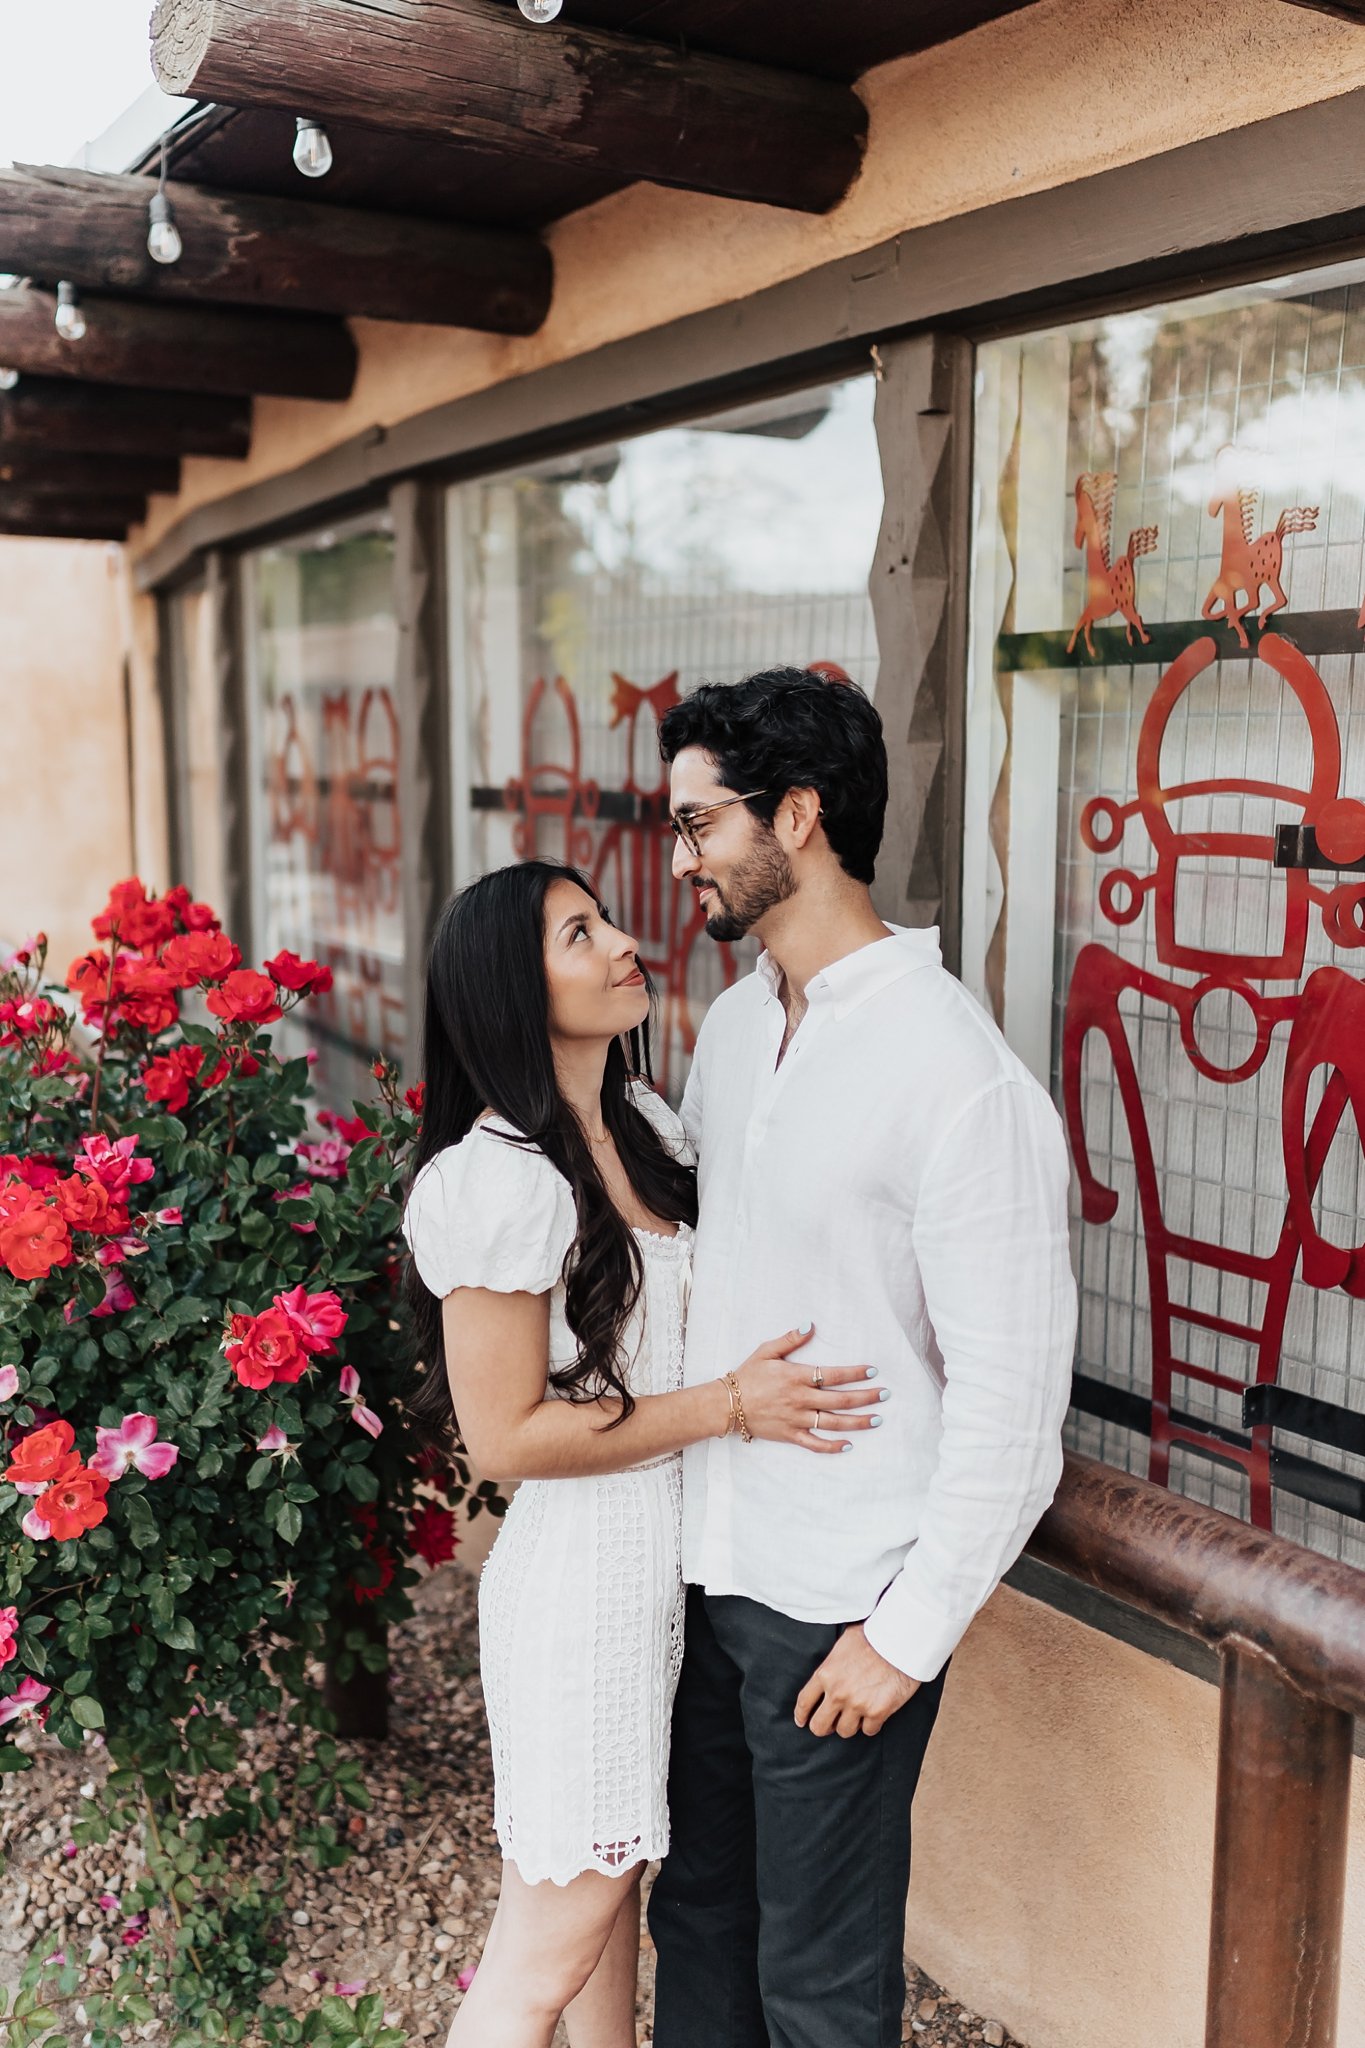 Alicia+lucia+photography+-+albuquerque+wedding+photographer+-+santa+fe+wedding+photography+-+new+mexico+wedding+photographer+-+new+mexico+wedding+-+old+town+engagement+-+old+town+wedding+-+southwest+engagement_0004.jpg